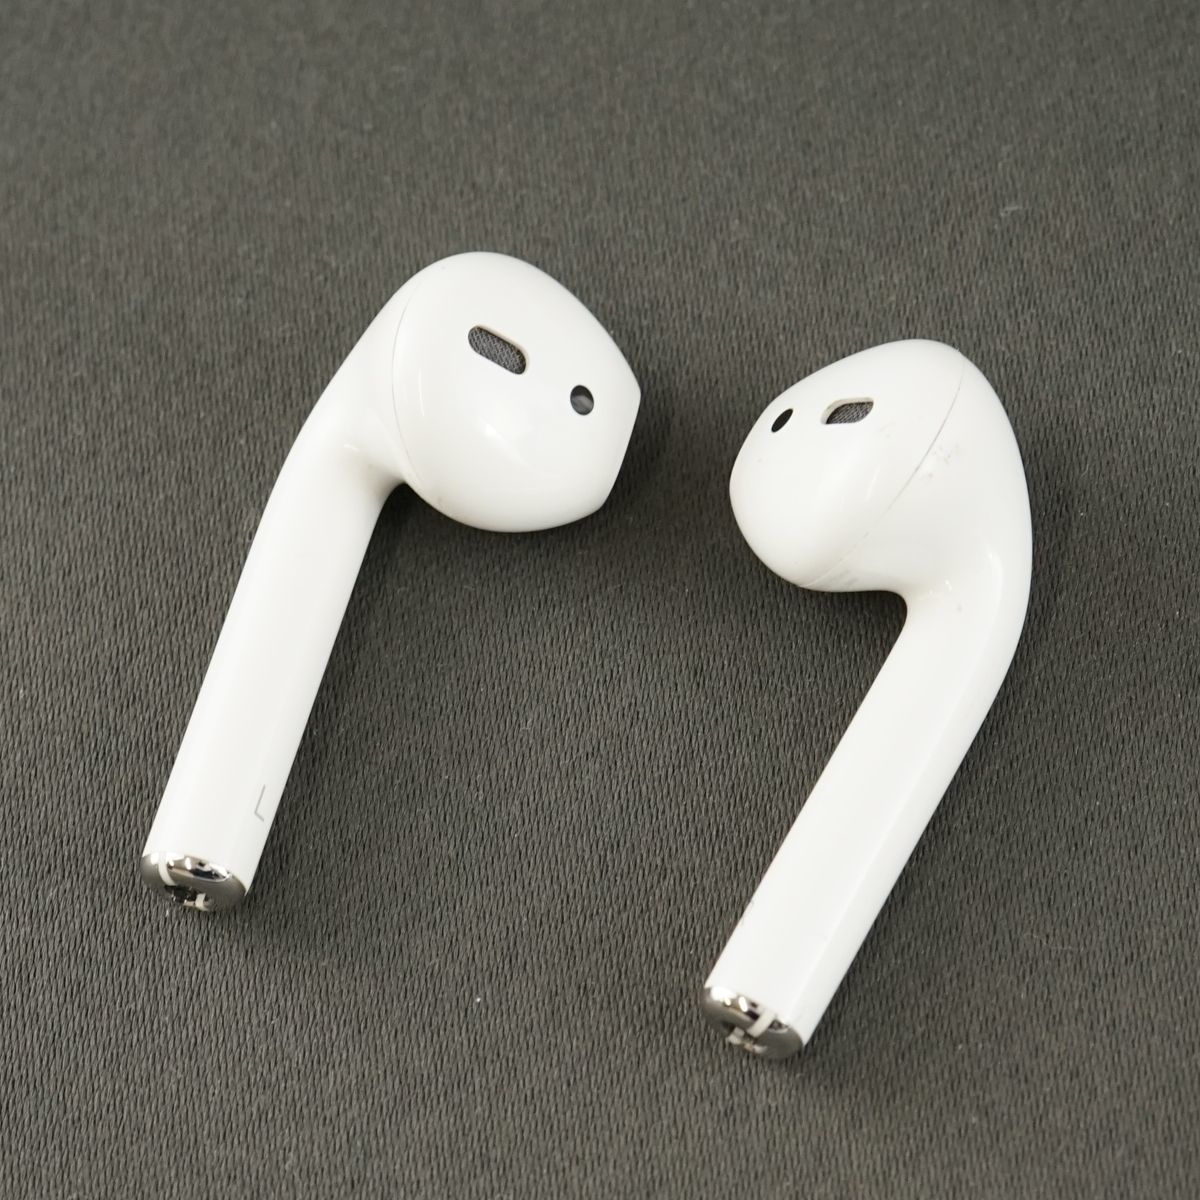 Apple AirPods with Charging Case エアーポッズ ワイヤレスイヤホン USED品 第二世代 Bluetooth MV7N2J/A 完動品 即日発送 T V8018_画像4